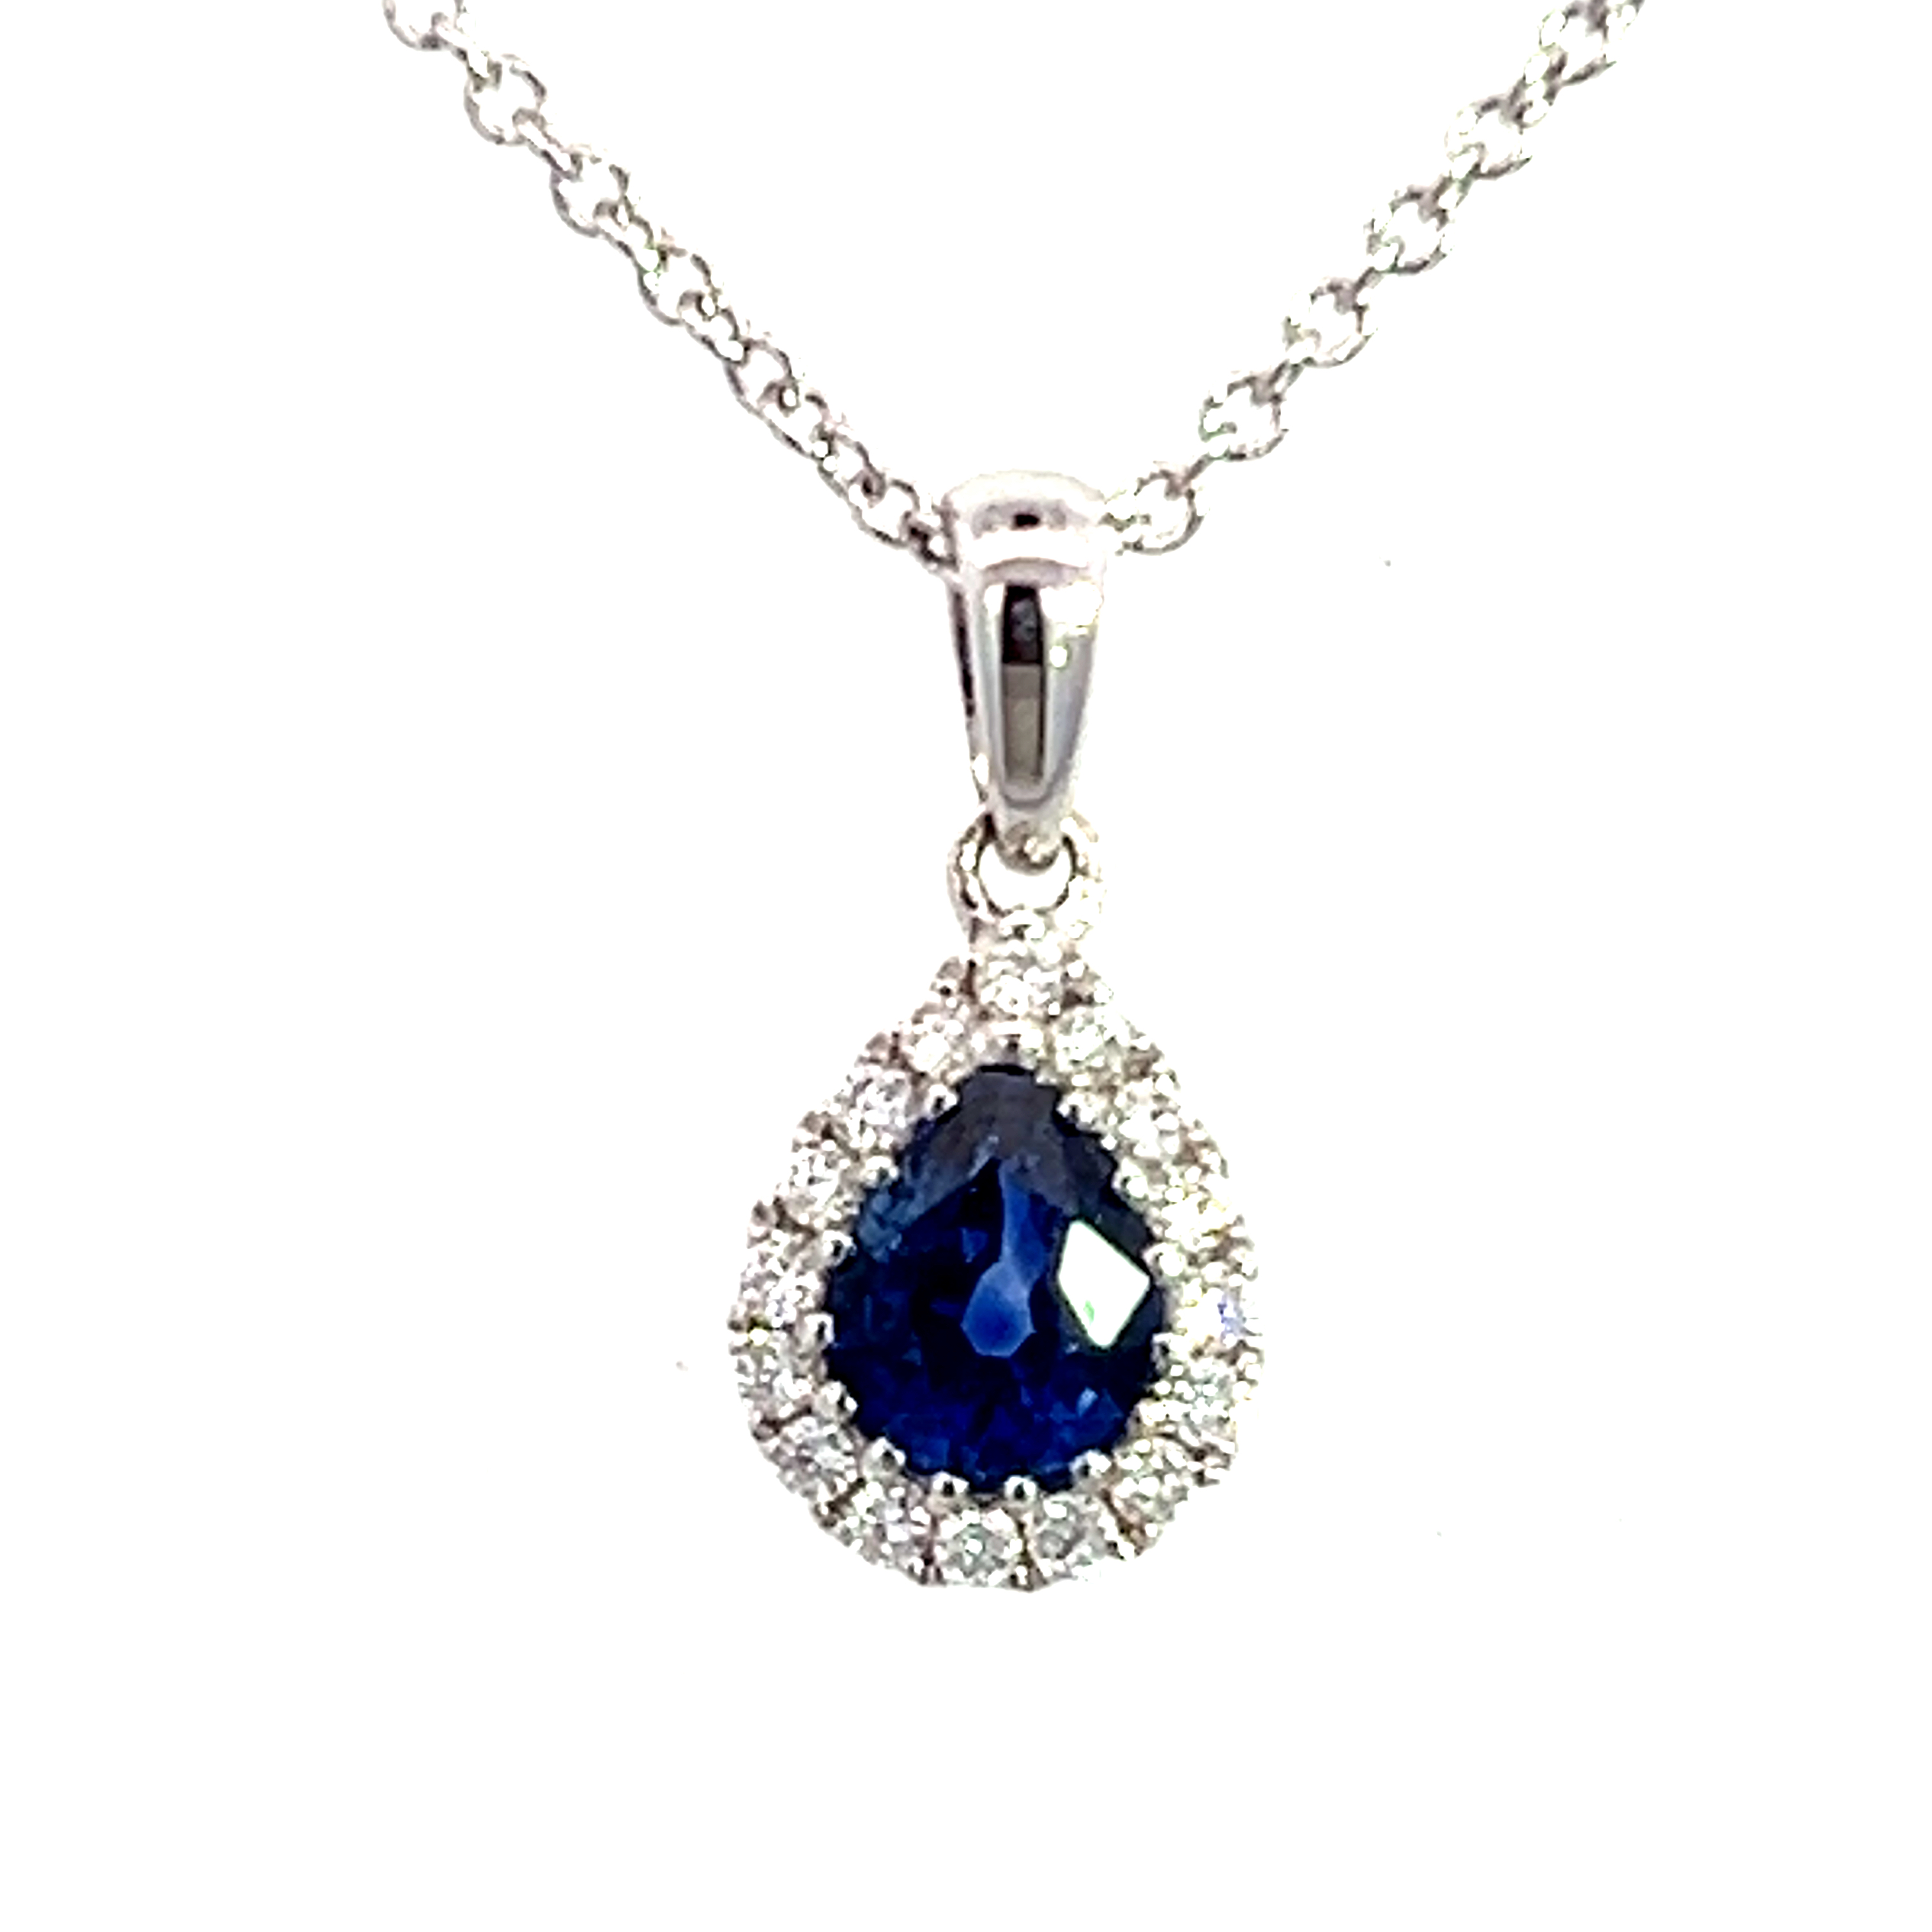 18 Carat White Gold and Pear Shape Sapphire Pendant